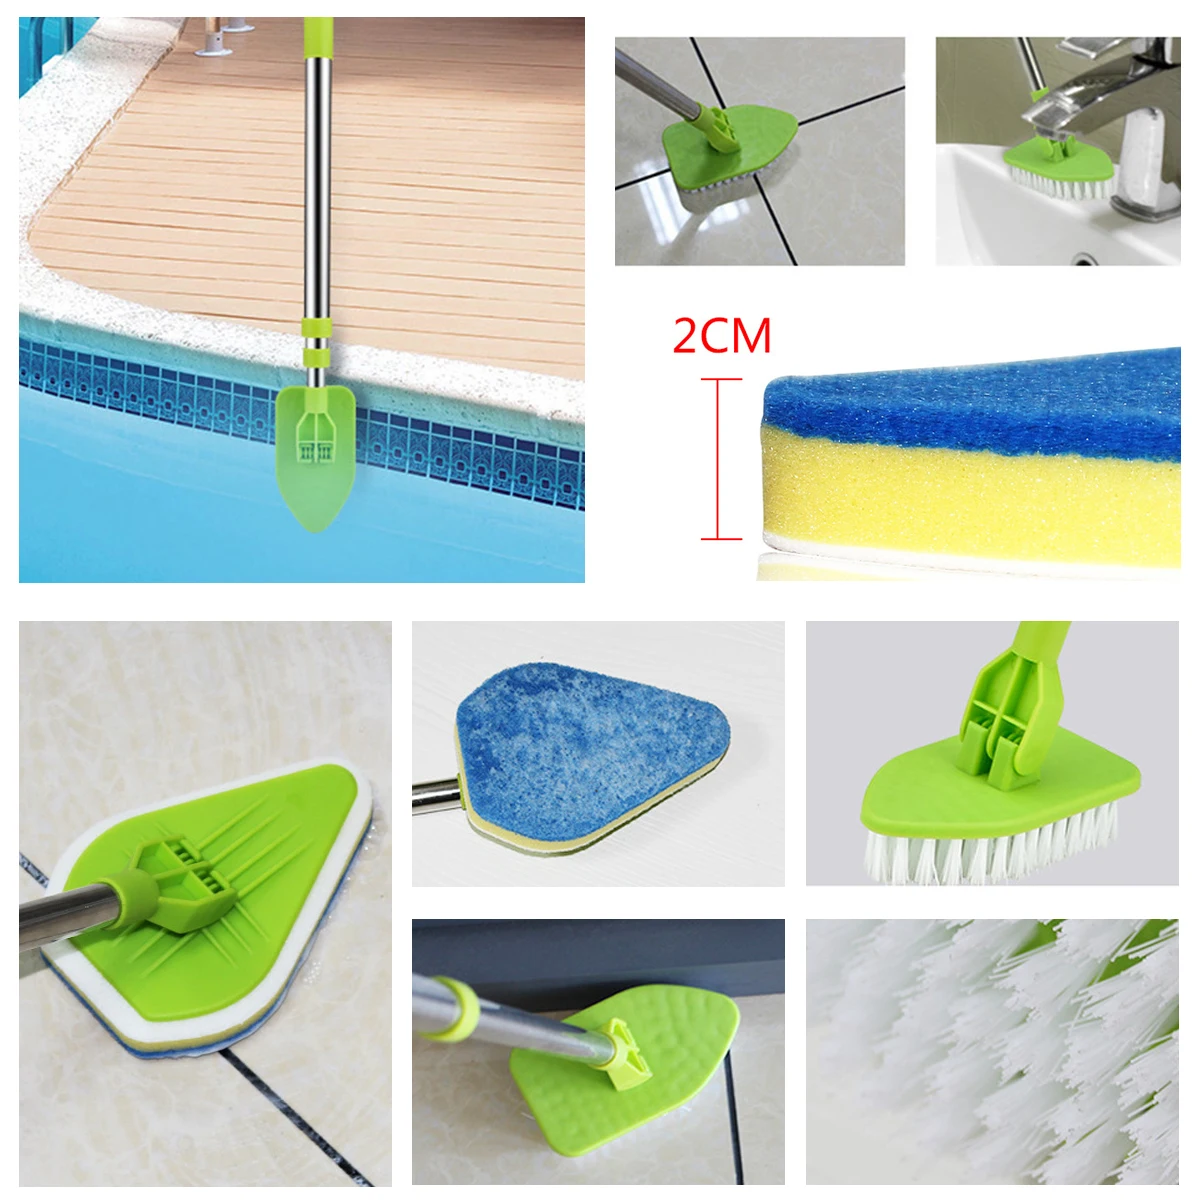 https://ae01.alicdn.com/kf/Sc4c3a4978468438b9e9020f3a92da4f8D/Scrub-Cleaning-Brush-with-Long-Handle-3-in-1-carpet-Shower-Cleaning-Tub-Tile-Scrubber-Brush.jpg